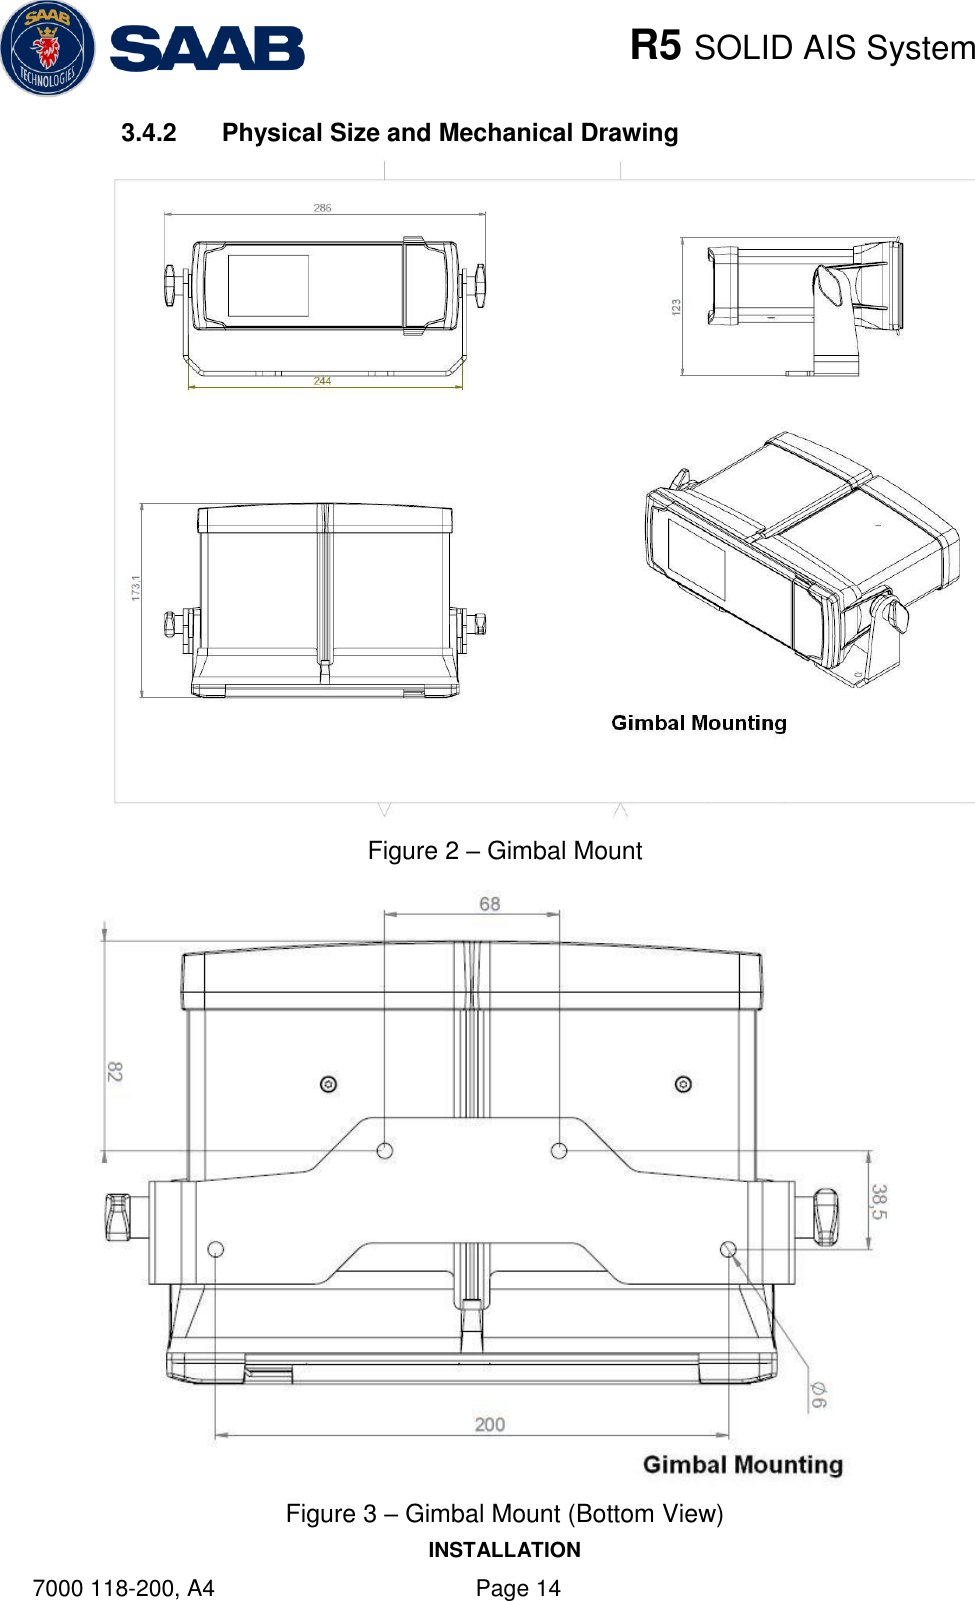    R5 SOLID AIS System INSTALLATION 7000 118-200, A4    Page 14 3.4.2  Physical Size and Mechanical Drawing  Figure 2 – Gimbal Mount  Figure 3 – Gimbal Mount (Bottom View) 